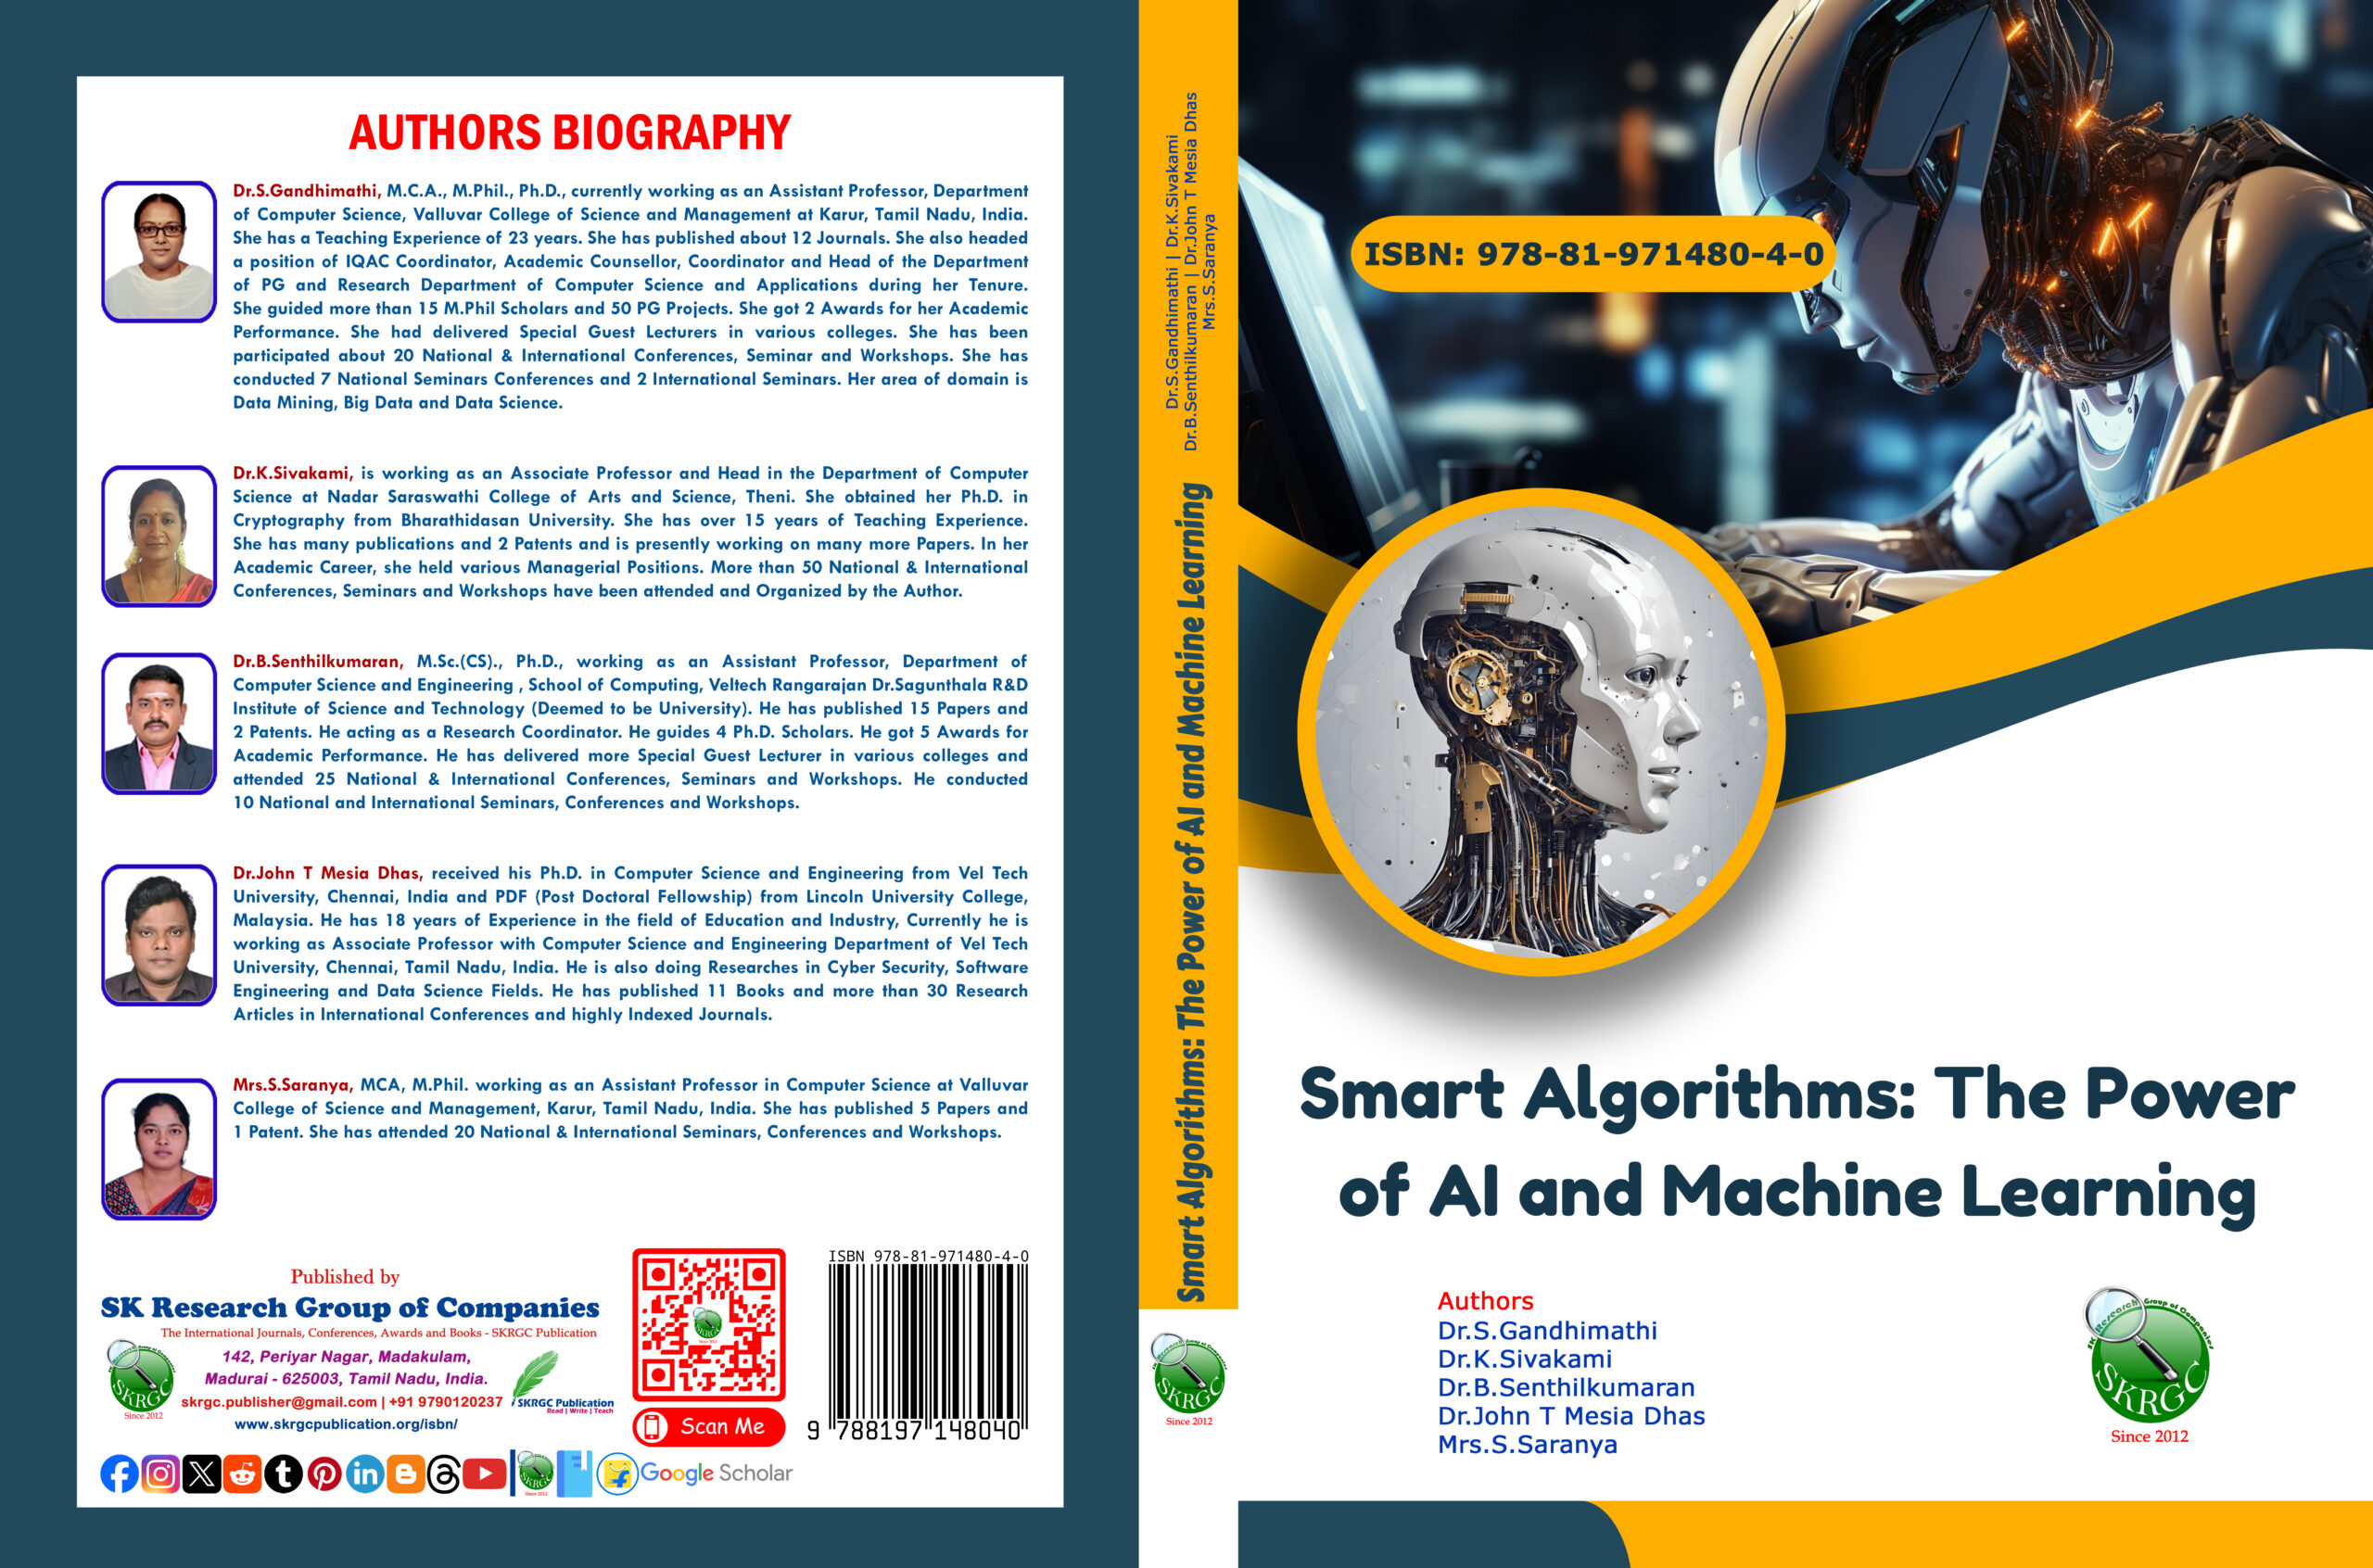 Smart Algorithms: The Power of AI and Machine Learning